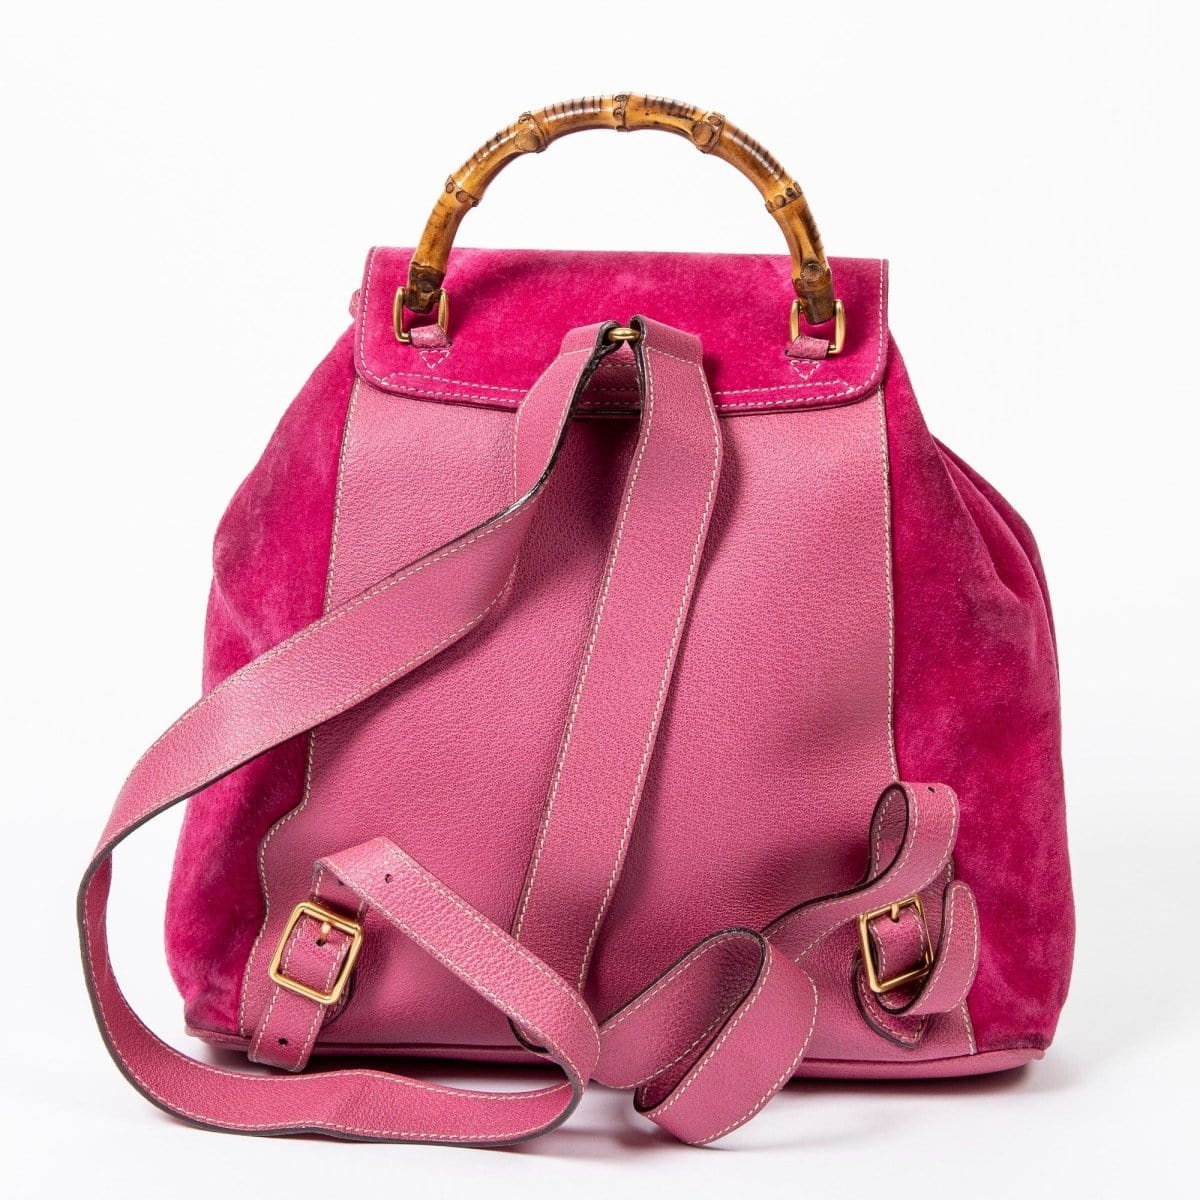 7. Lp x christos Gucci Bamboo Backpack Gucci Vintage Bamboo Backpack in Pink - AWL2305